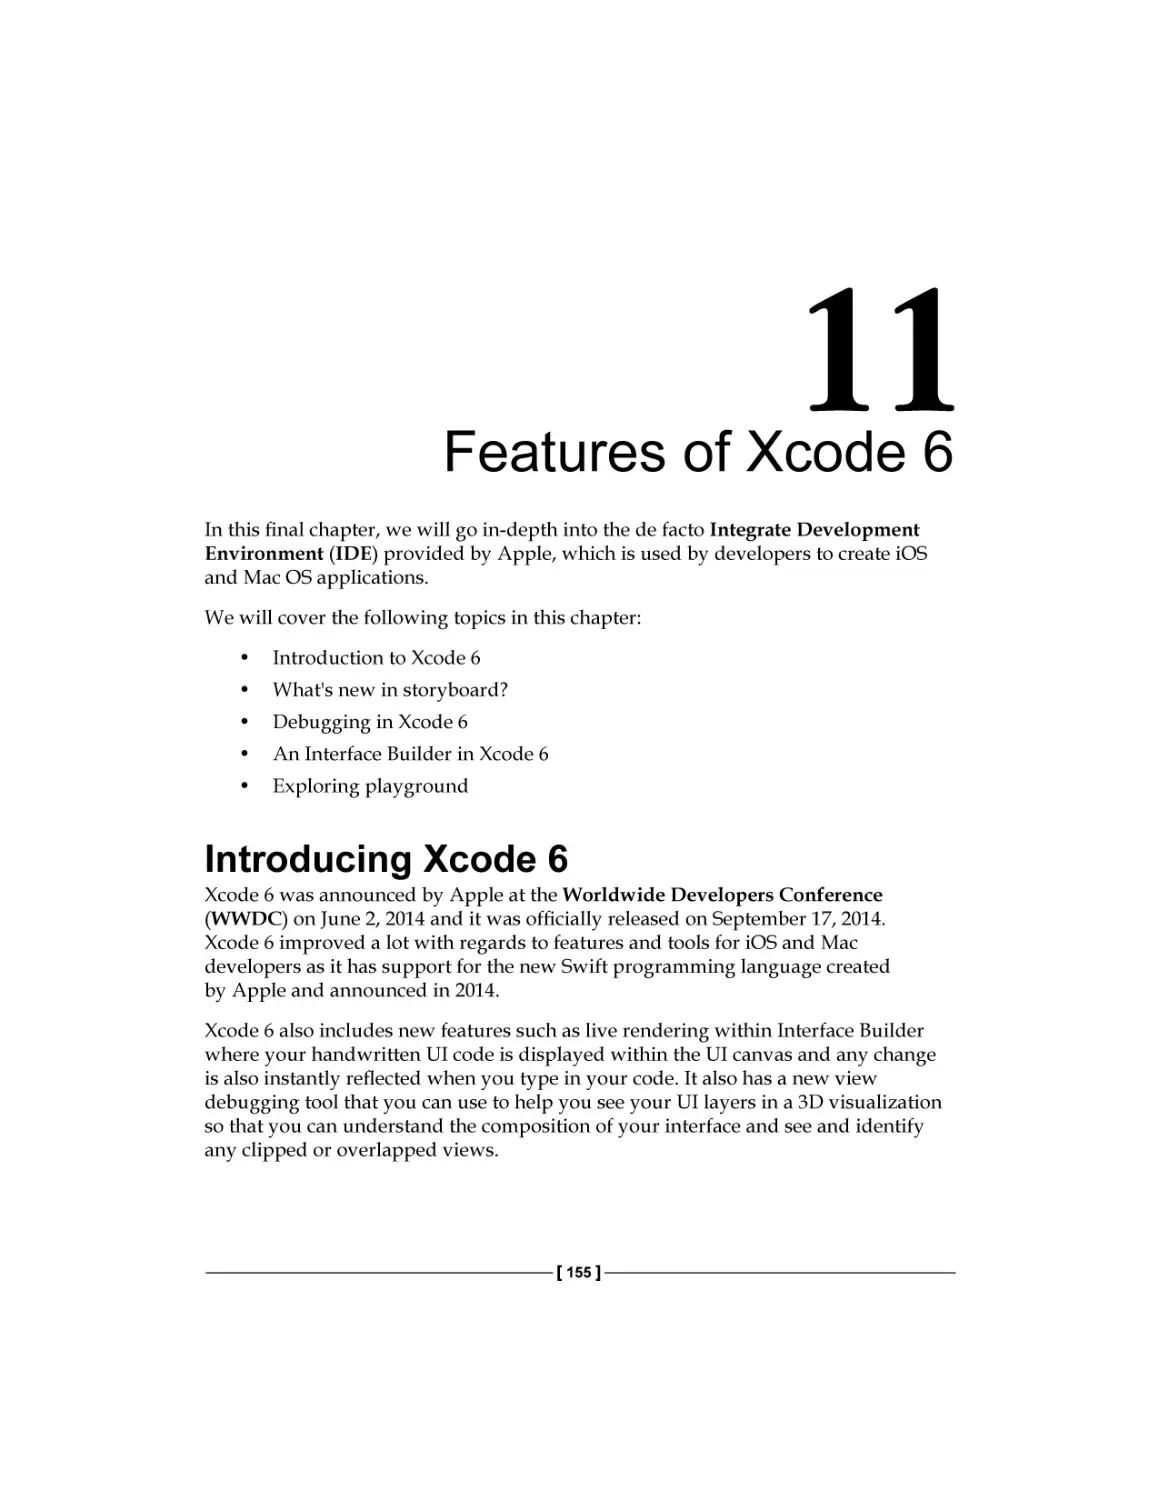 Chapter 11
Introducing Xcode 6